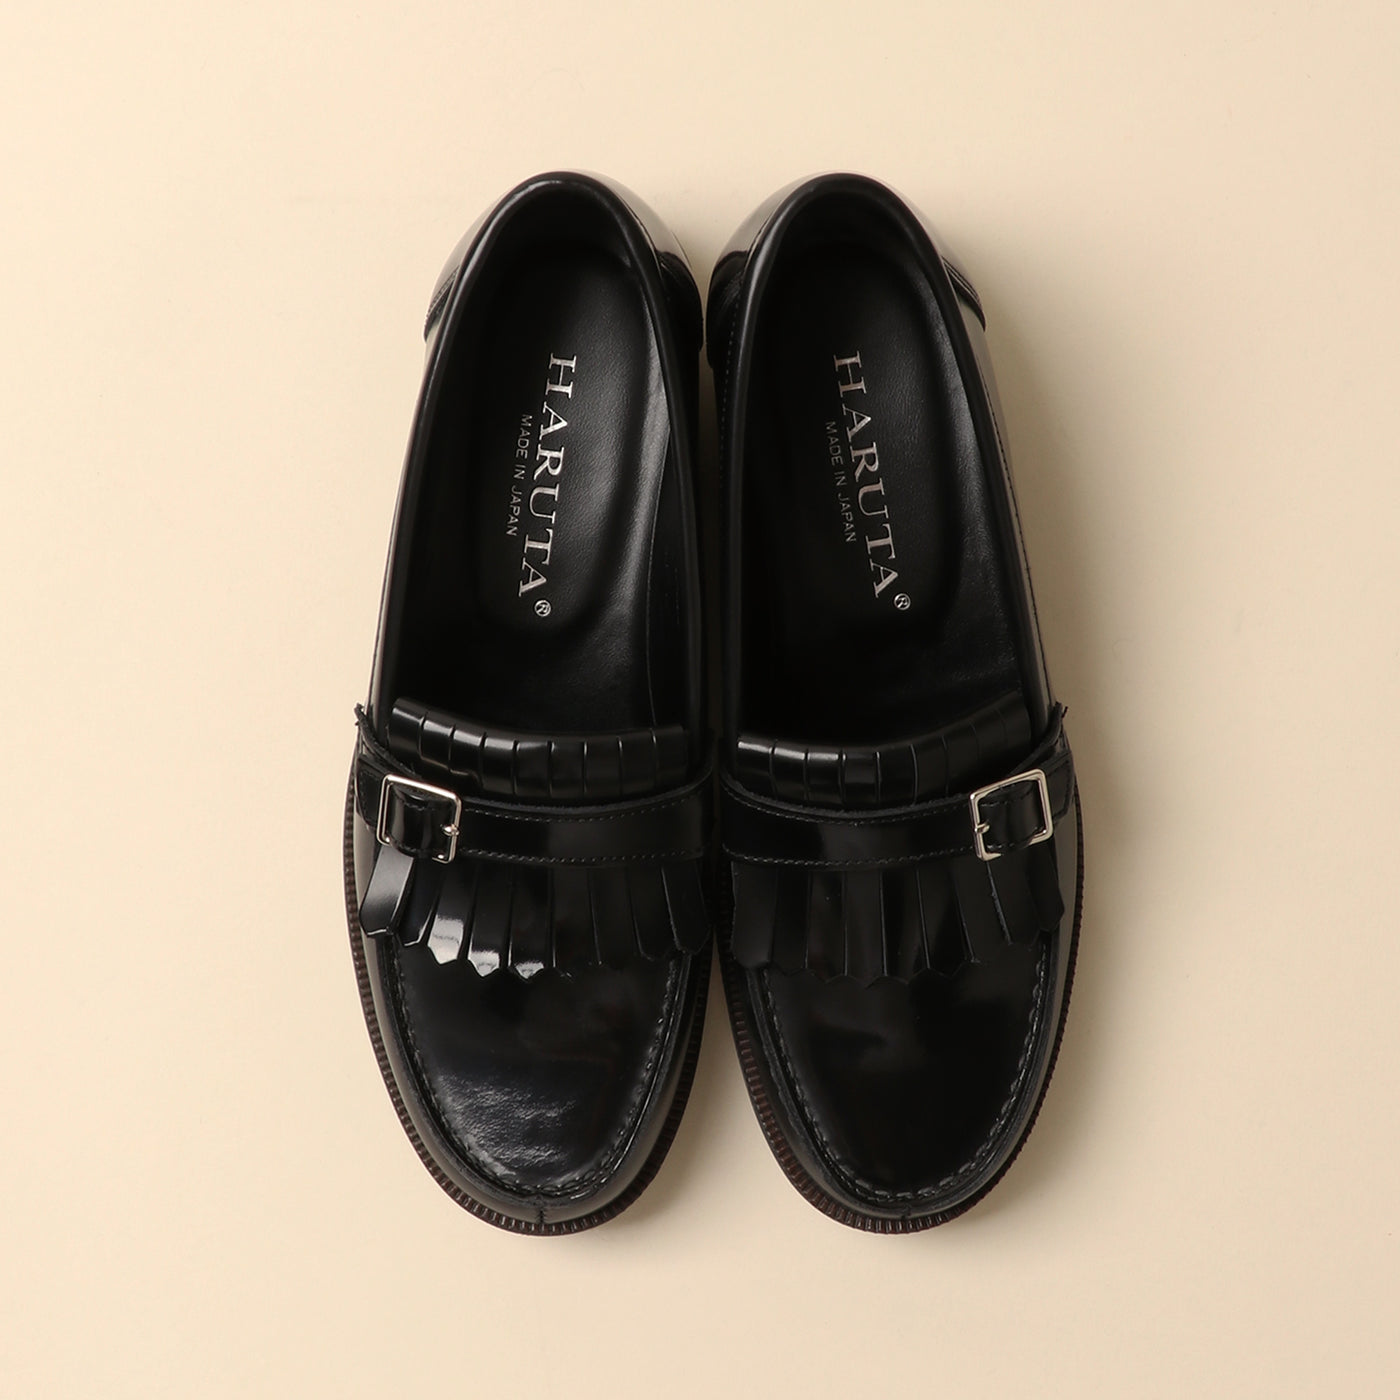 <HALTA> Casual quilted loafer / black